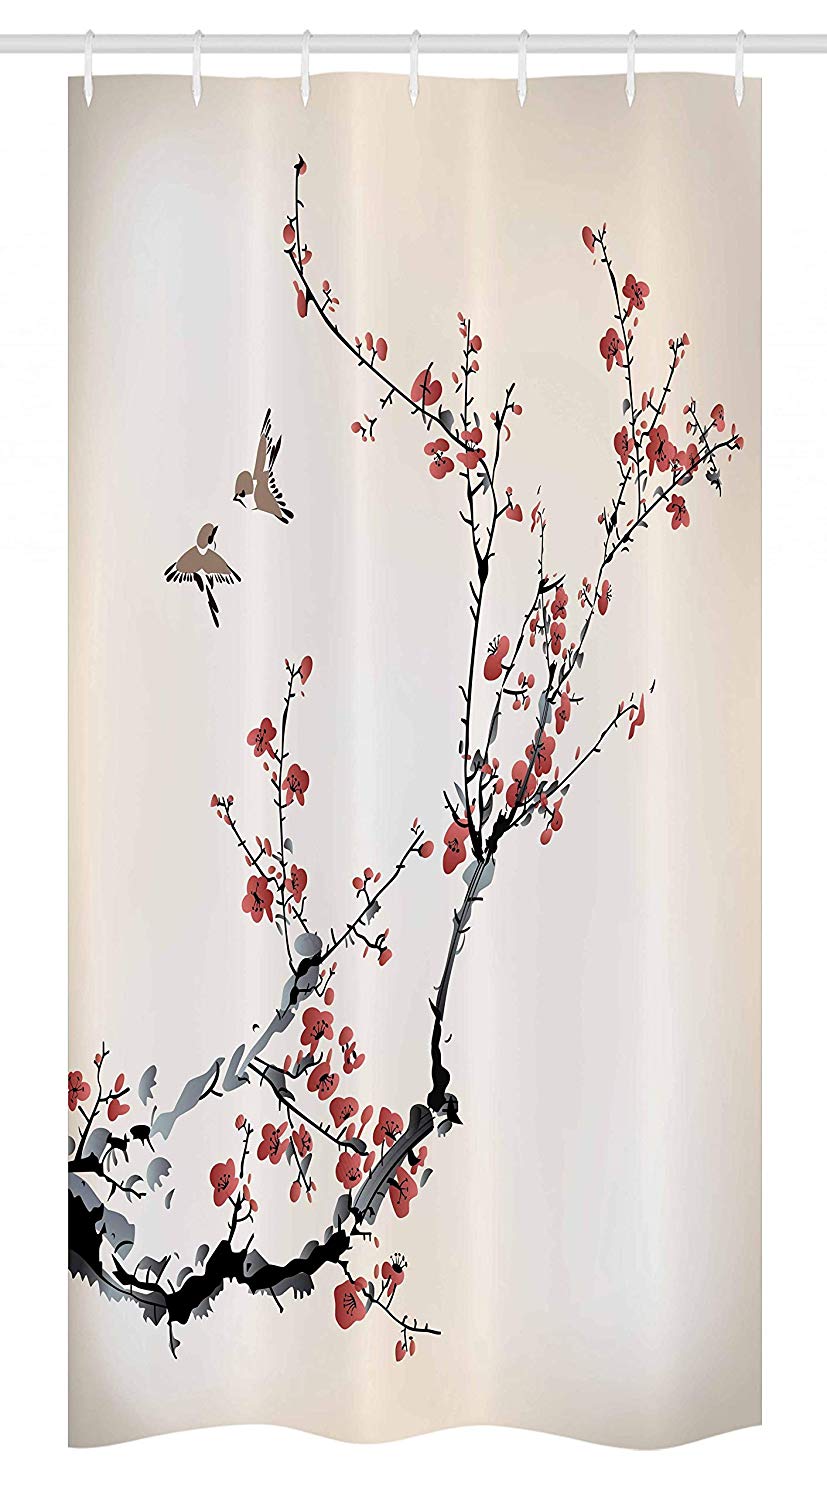 Ambesonne Nature Stall Shower Curtain, Cherry Branches Flowers Buds and Birds Style Artwork with Painting Effect, Fabric Bathroom Decor Set with Hooks, 36" X 72", Burgundy Black